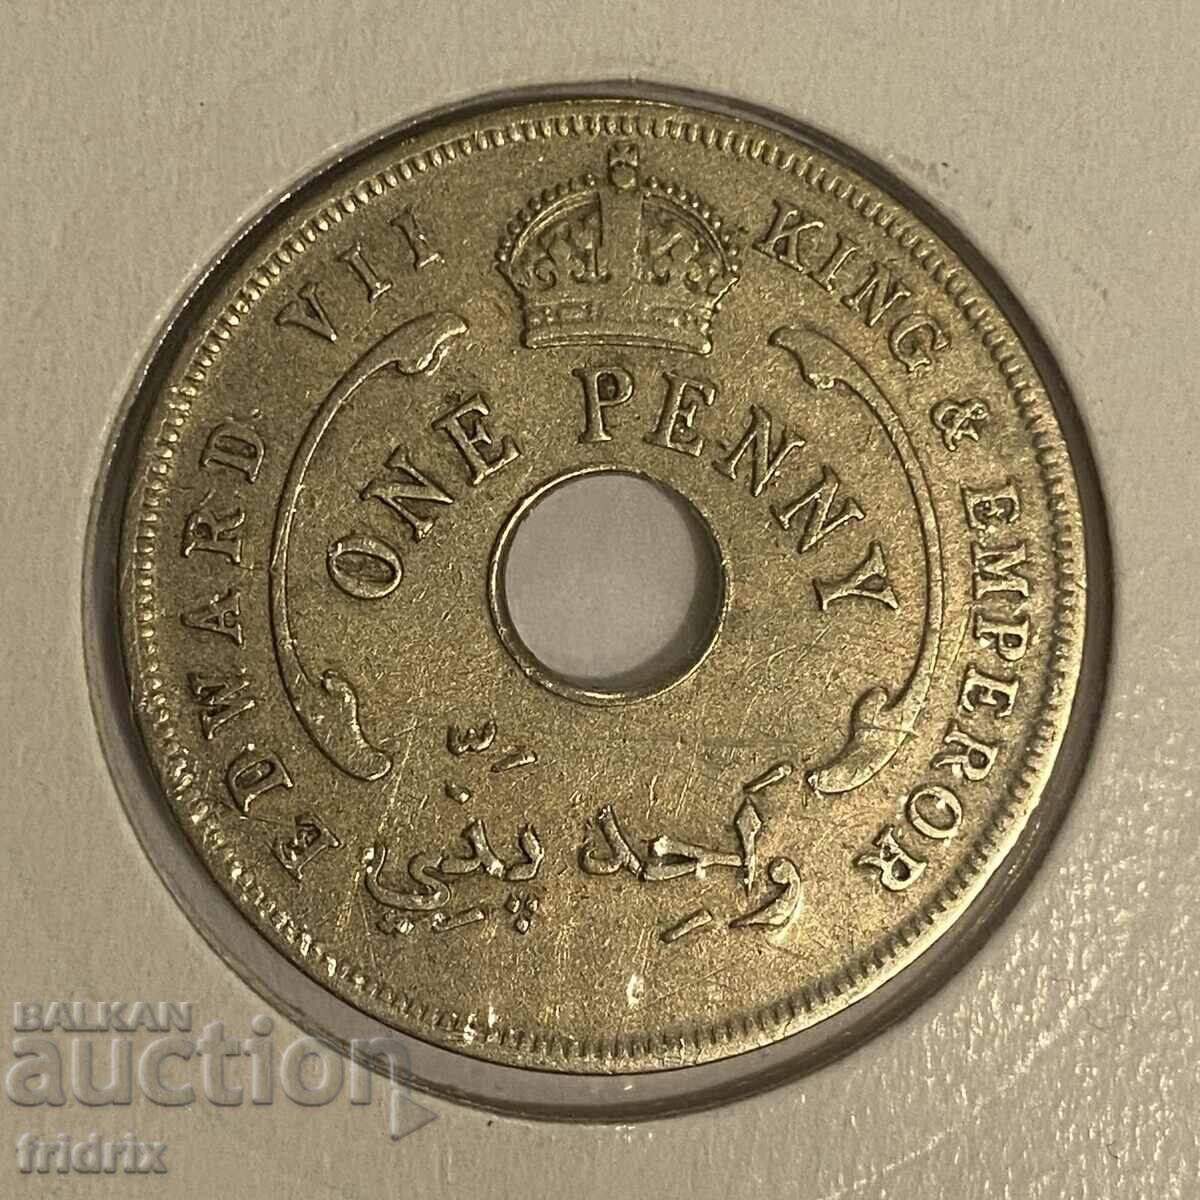 West Africa 1 penny / British West Africa 1 penny 1908